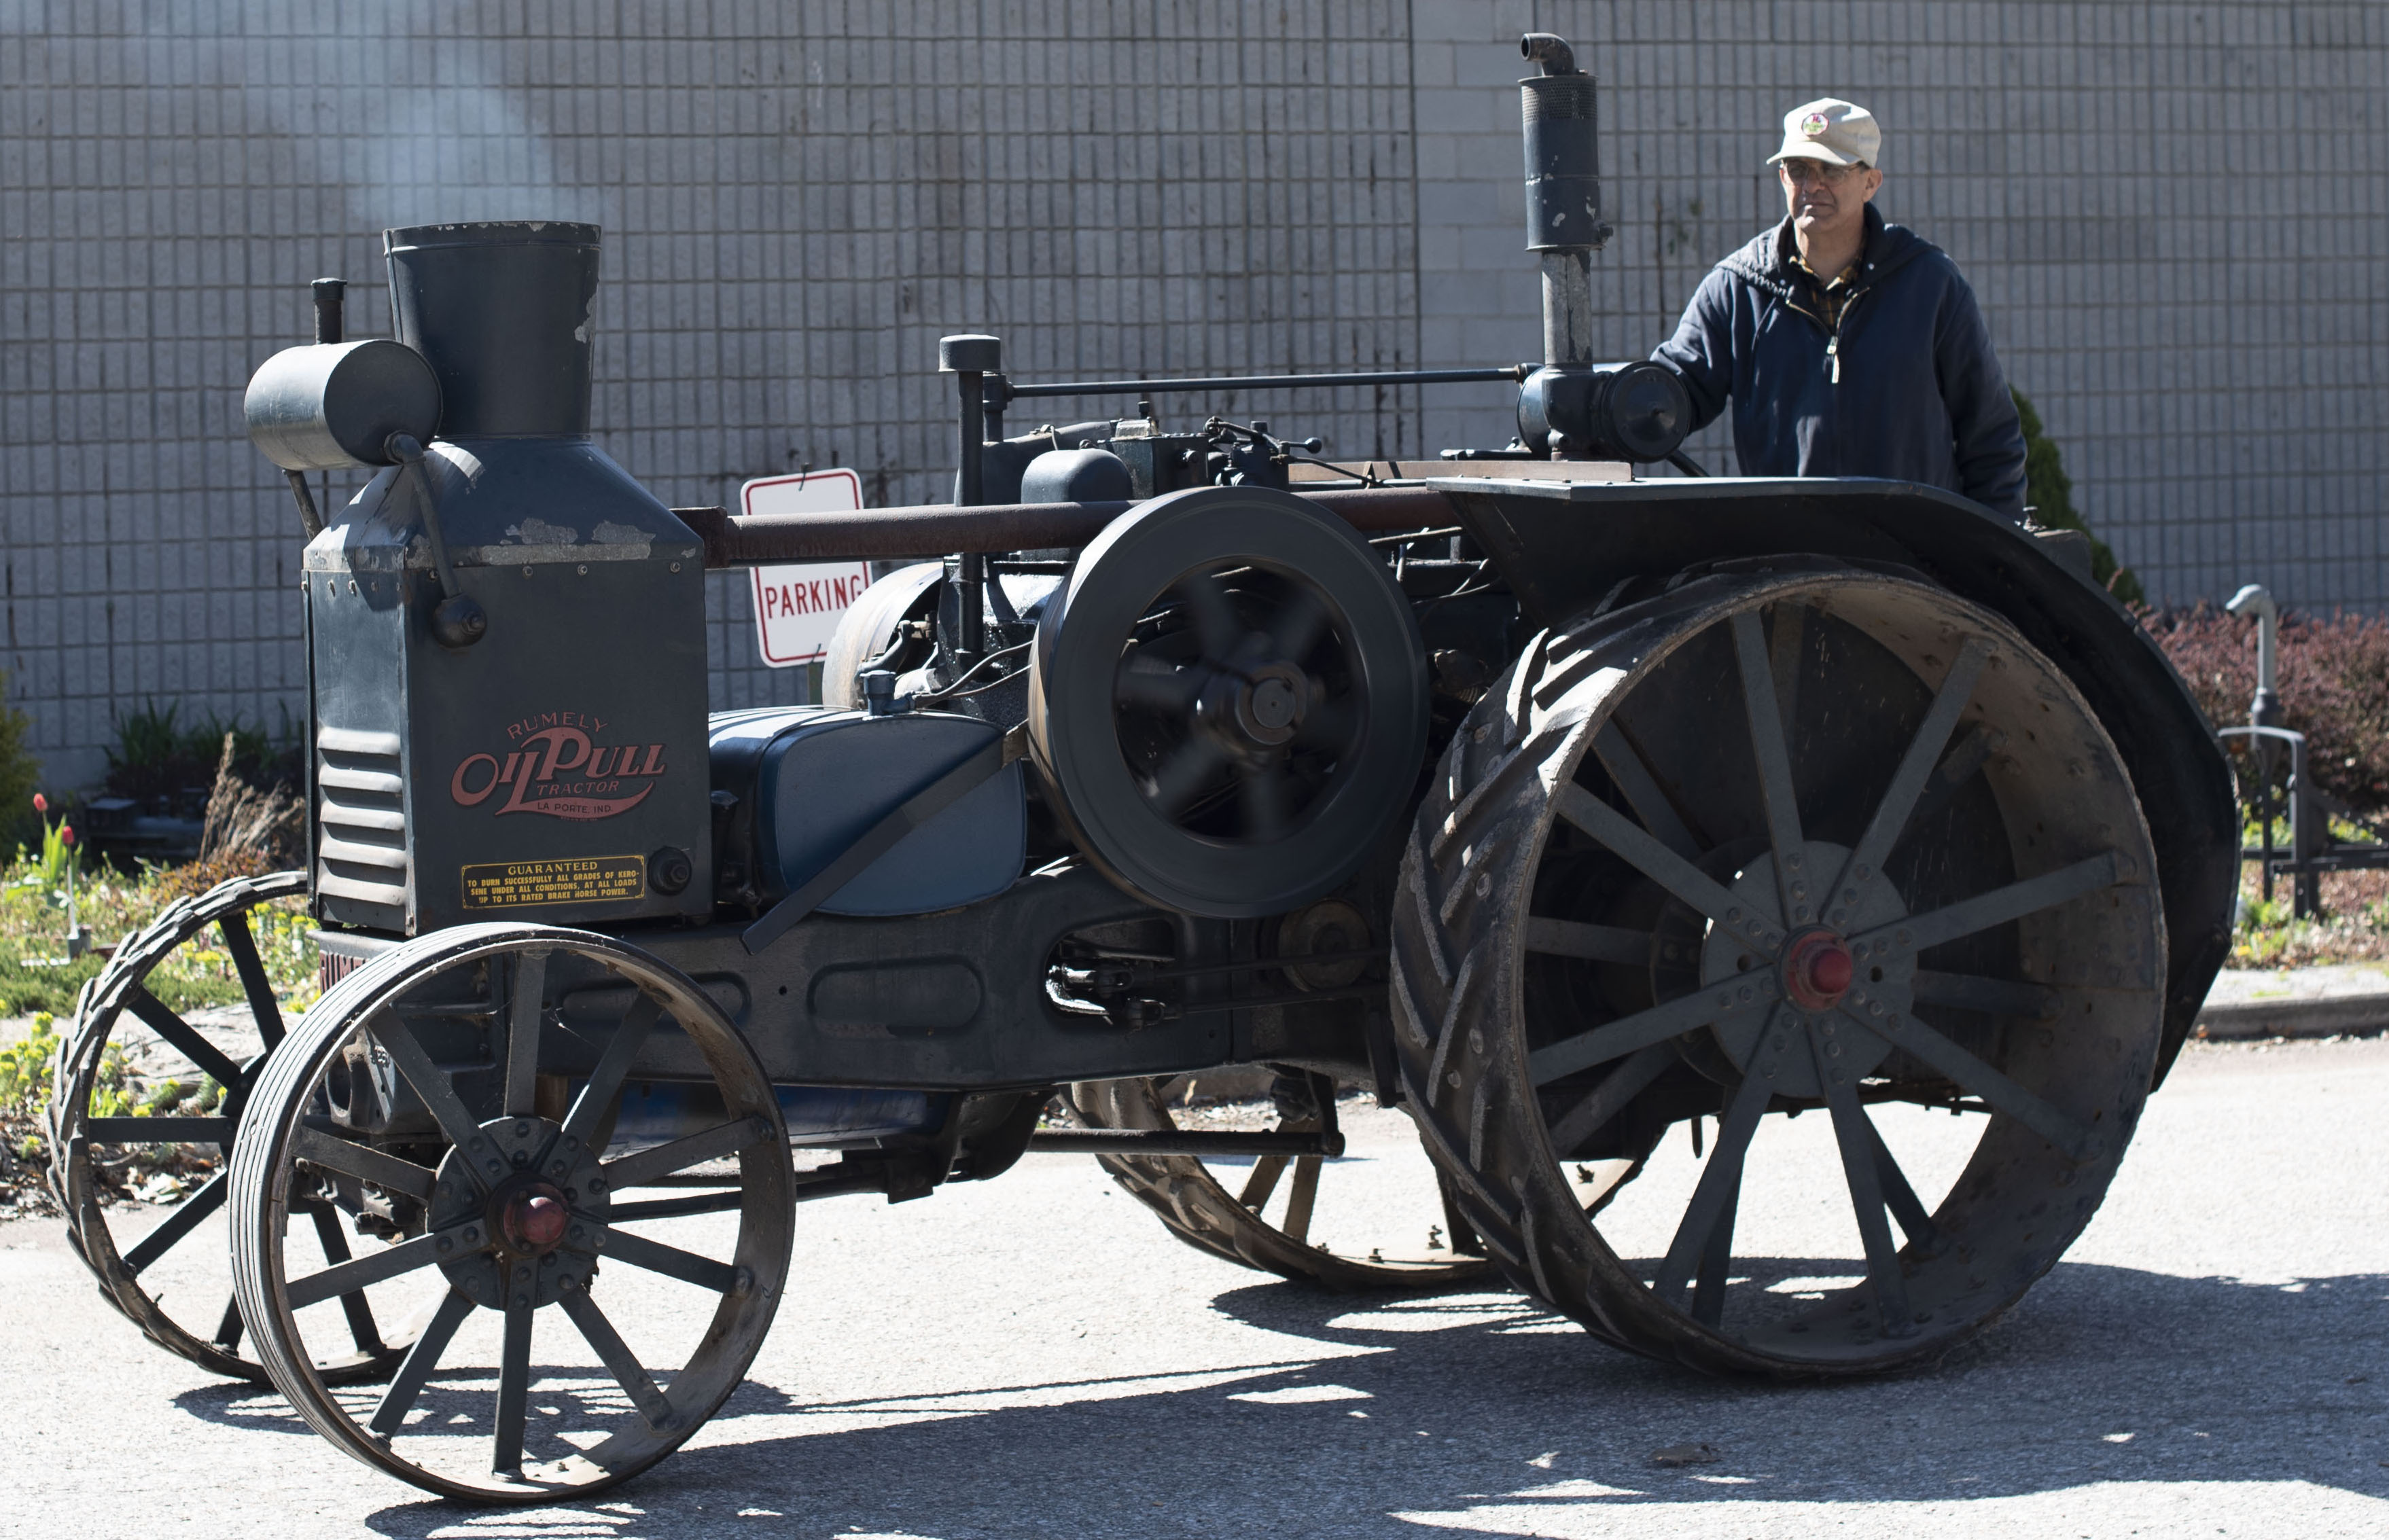 Lambton Heritage Museum staff member Jeremy Robson driving the historic Rumely tractor